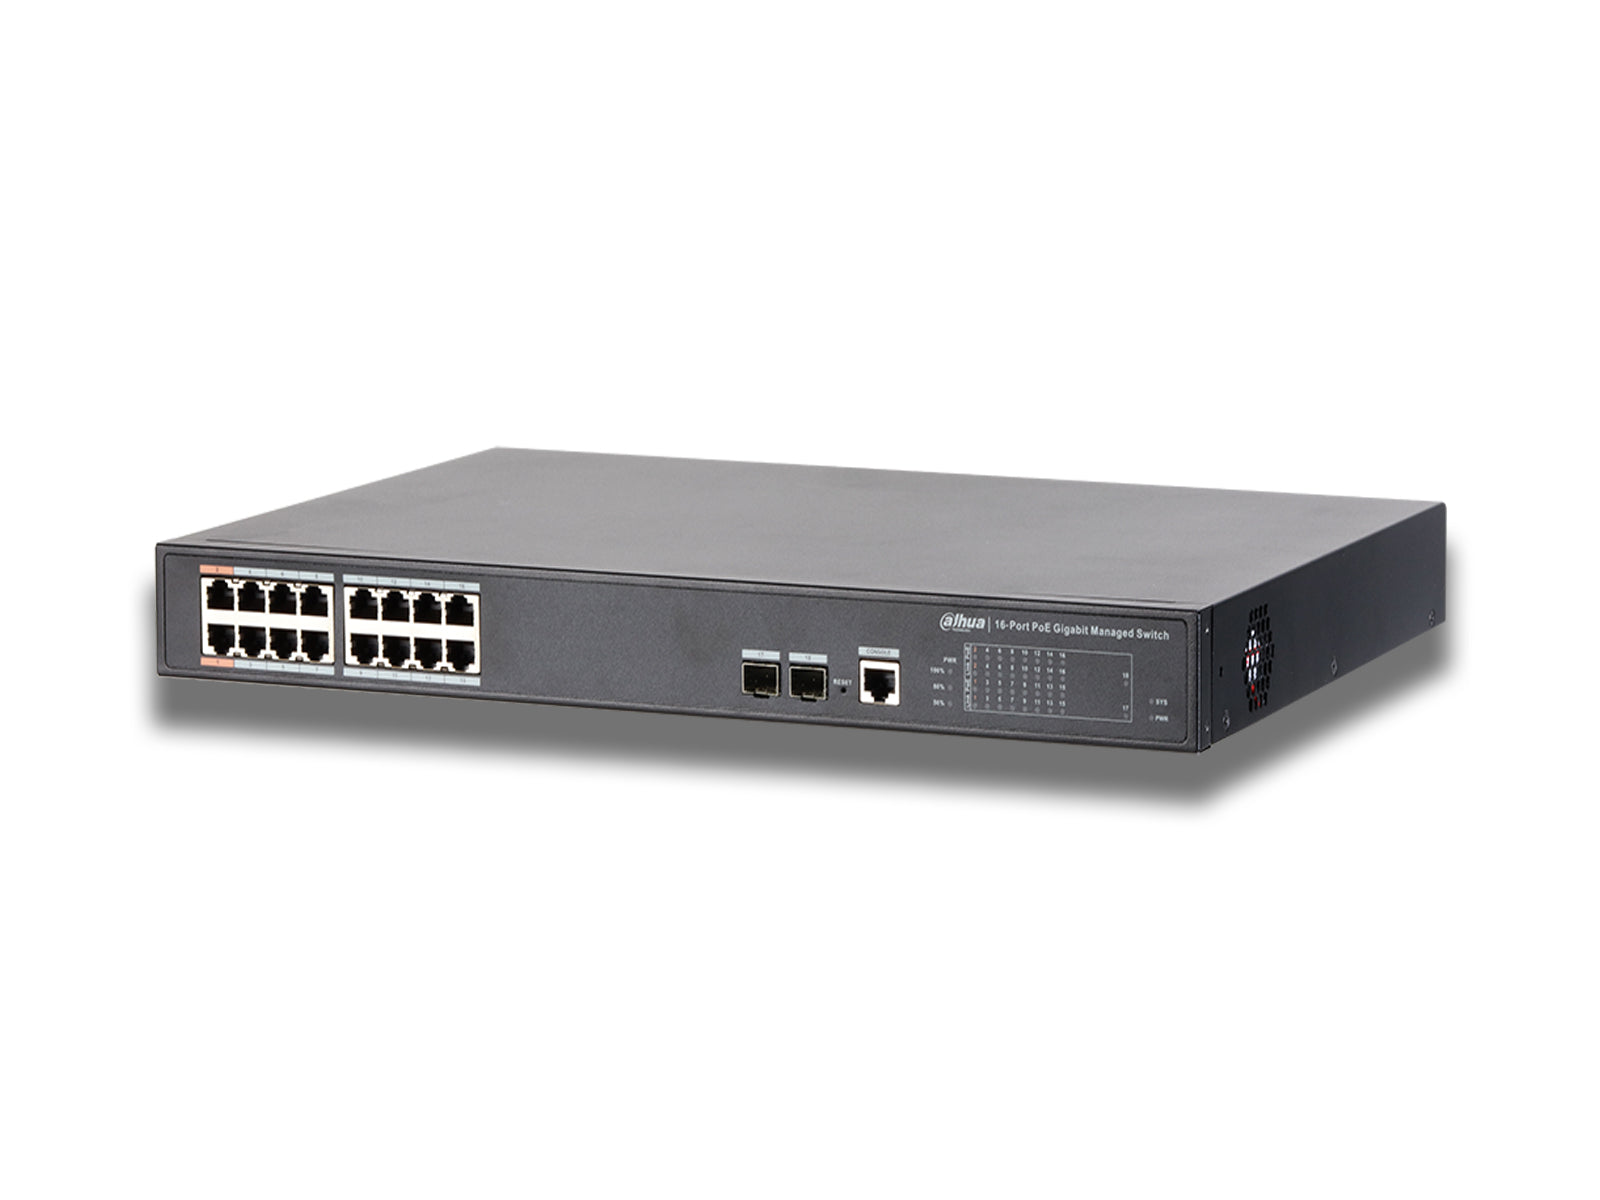 Networking Switches